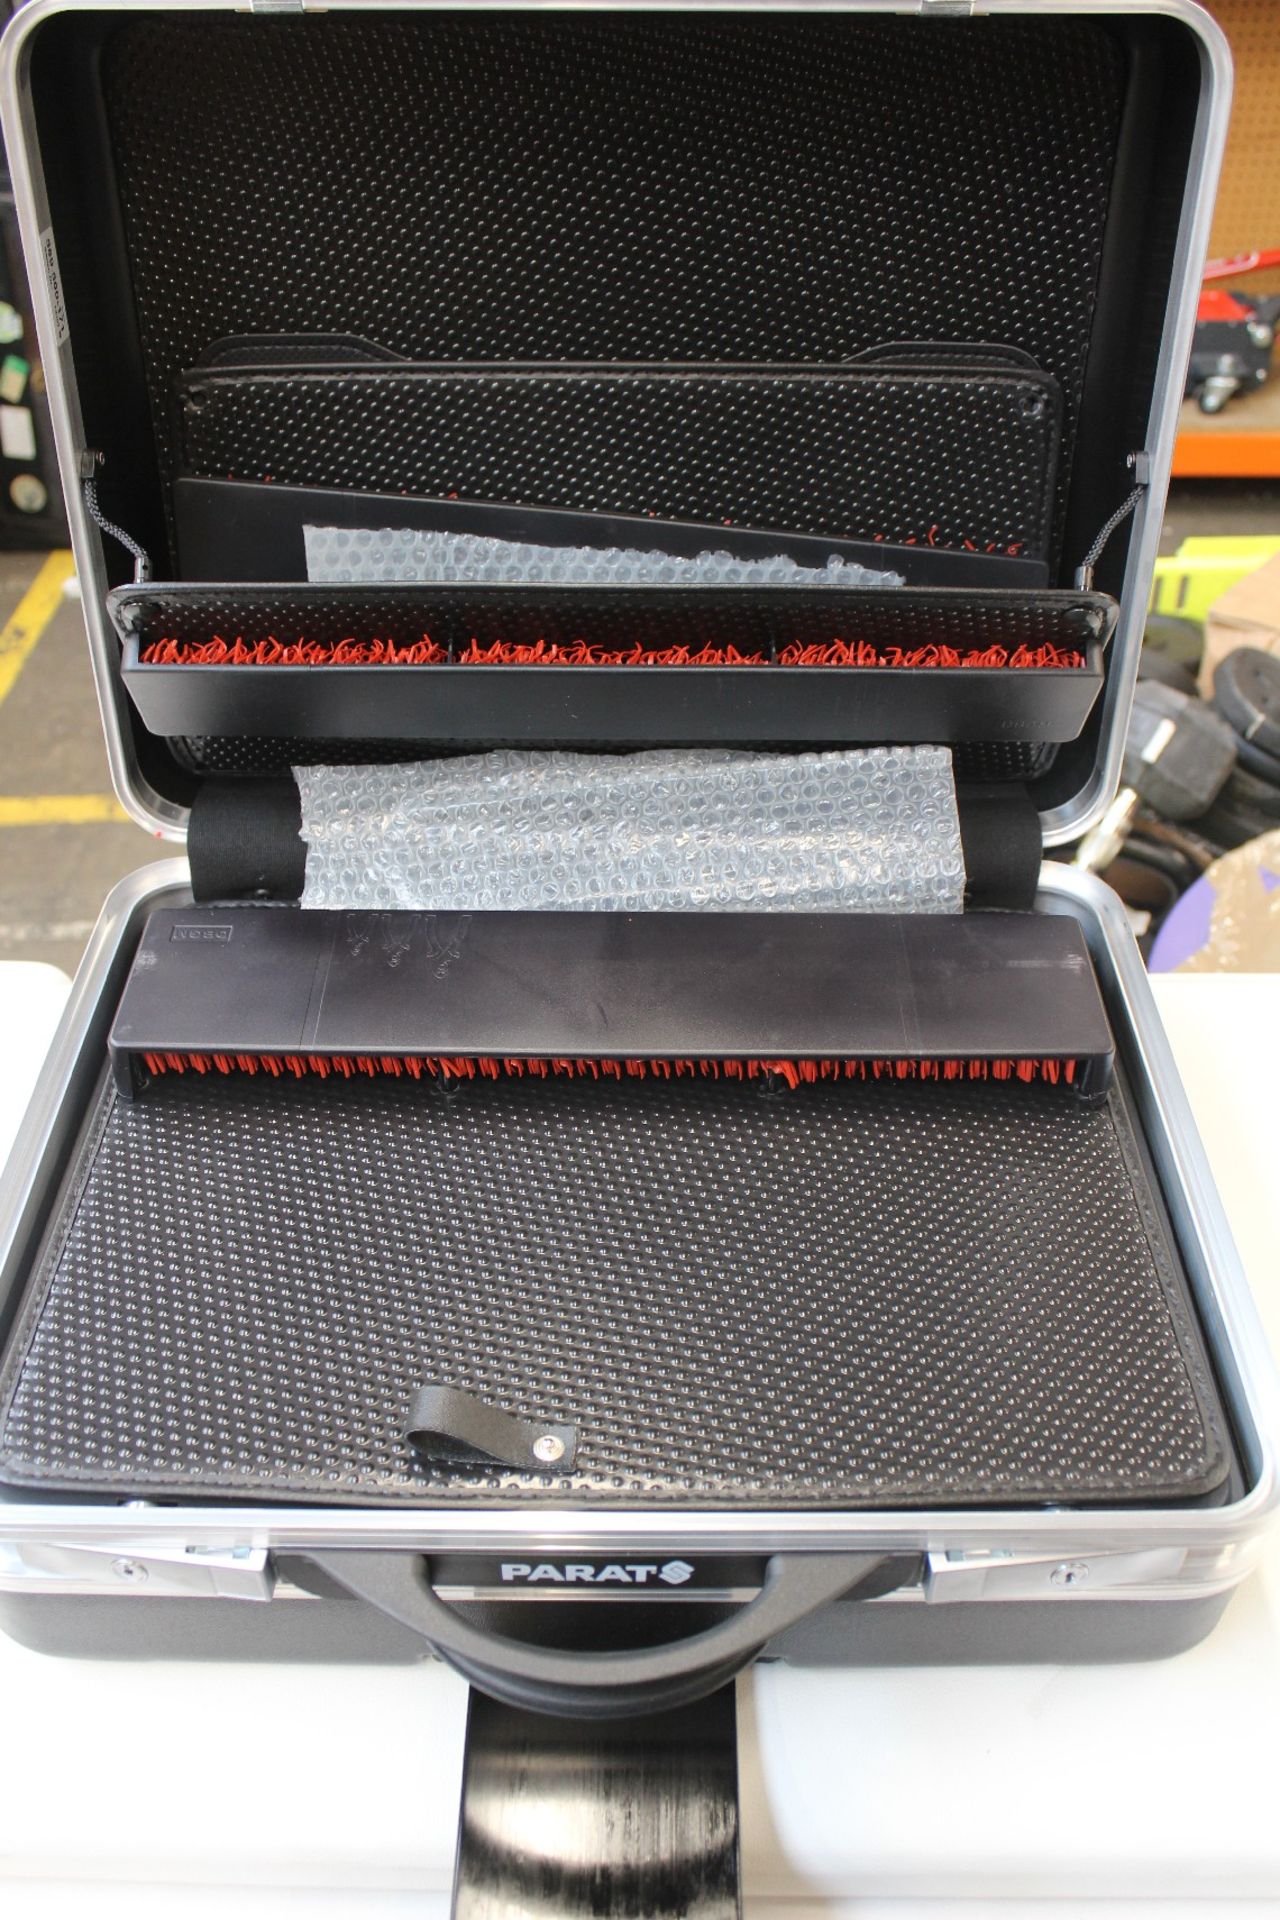 A Parat Classic all round tool case.